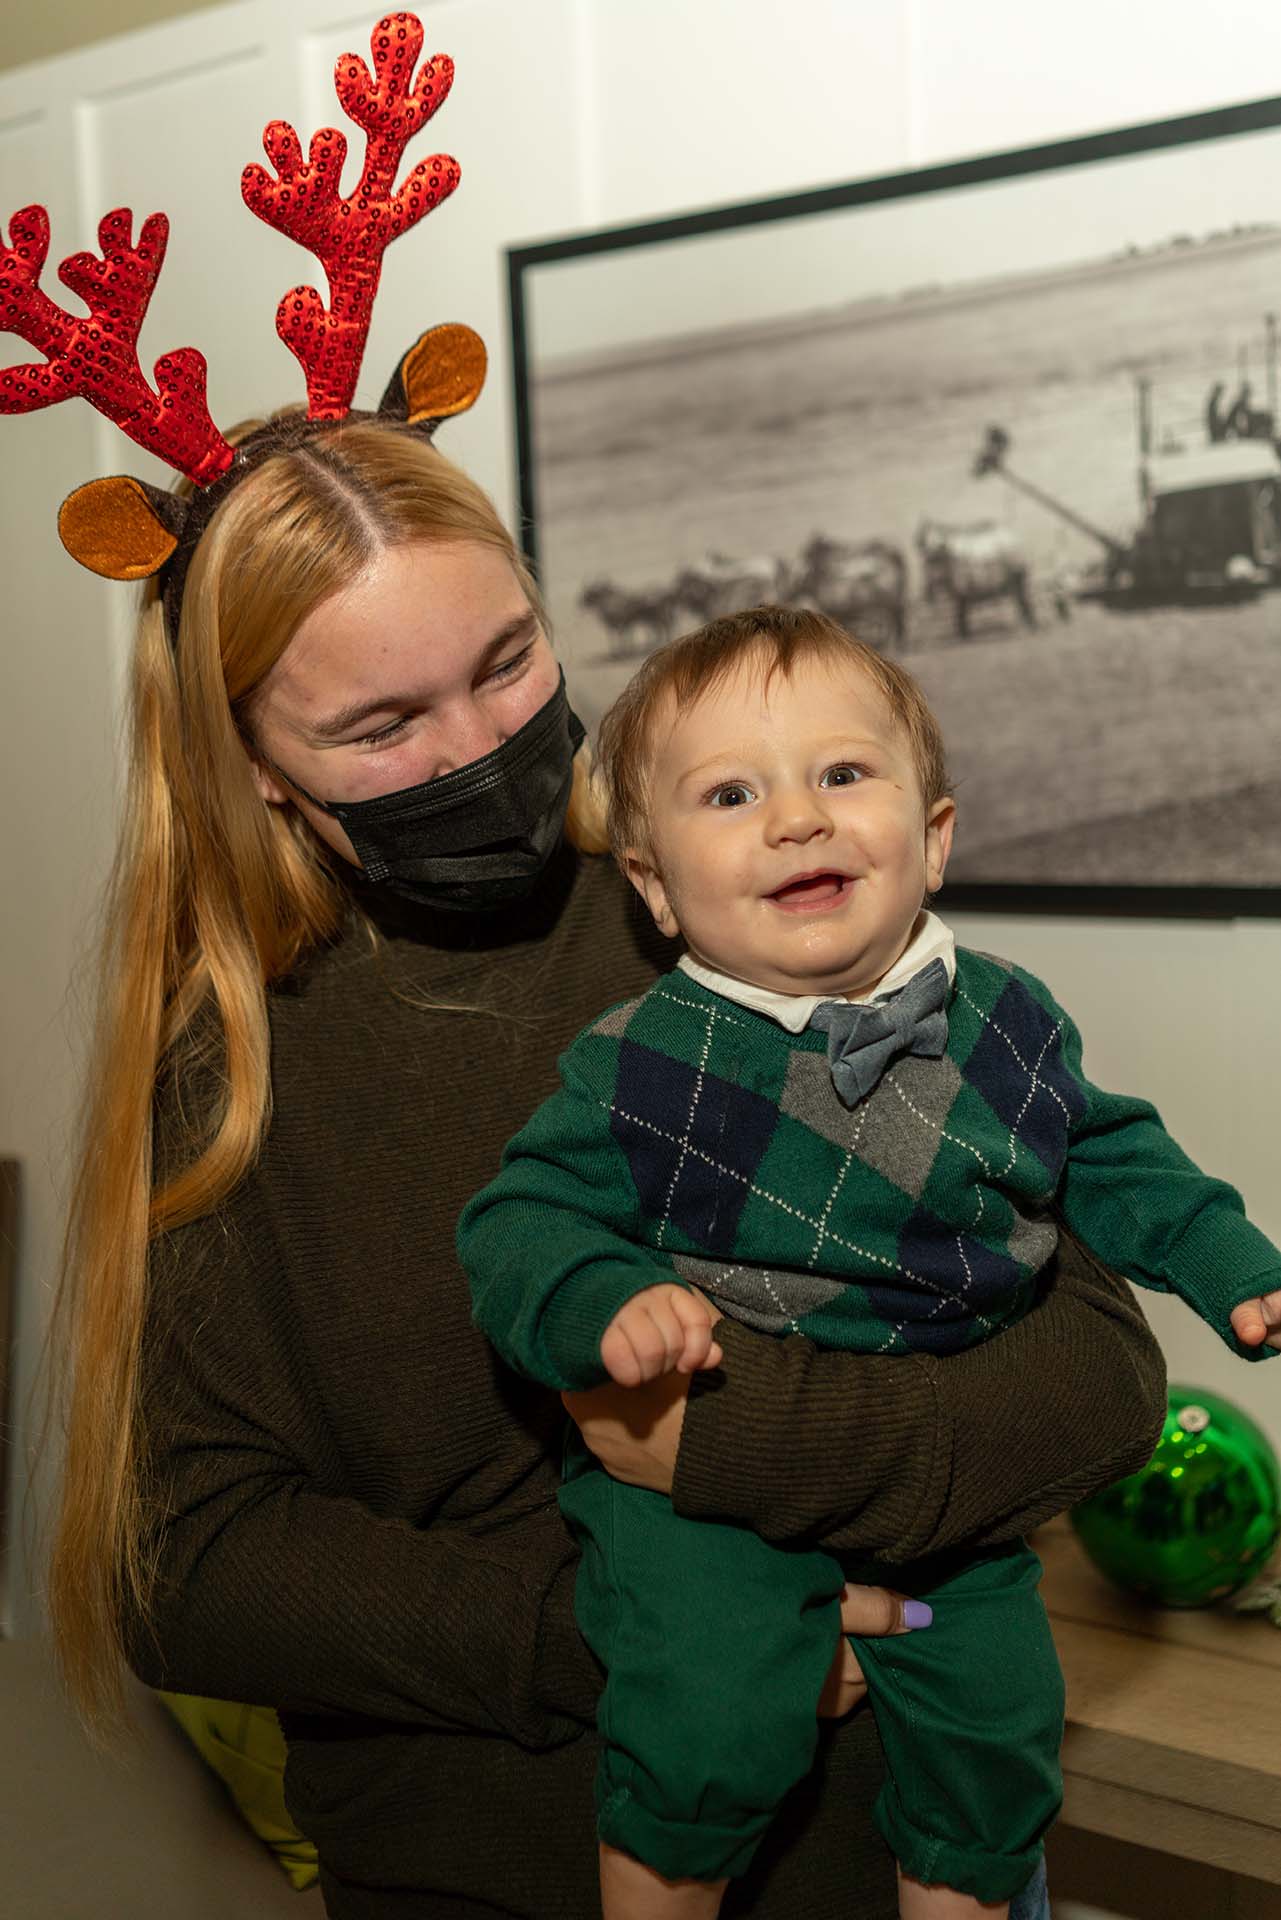 woman with reindeer headband holding a small child